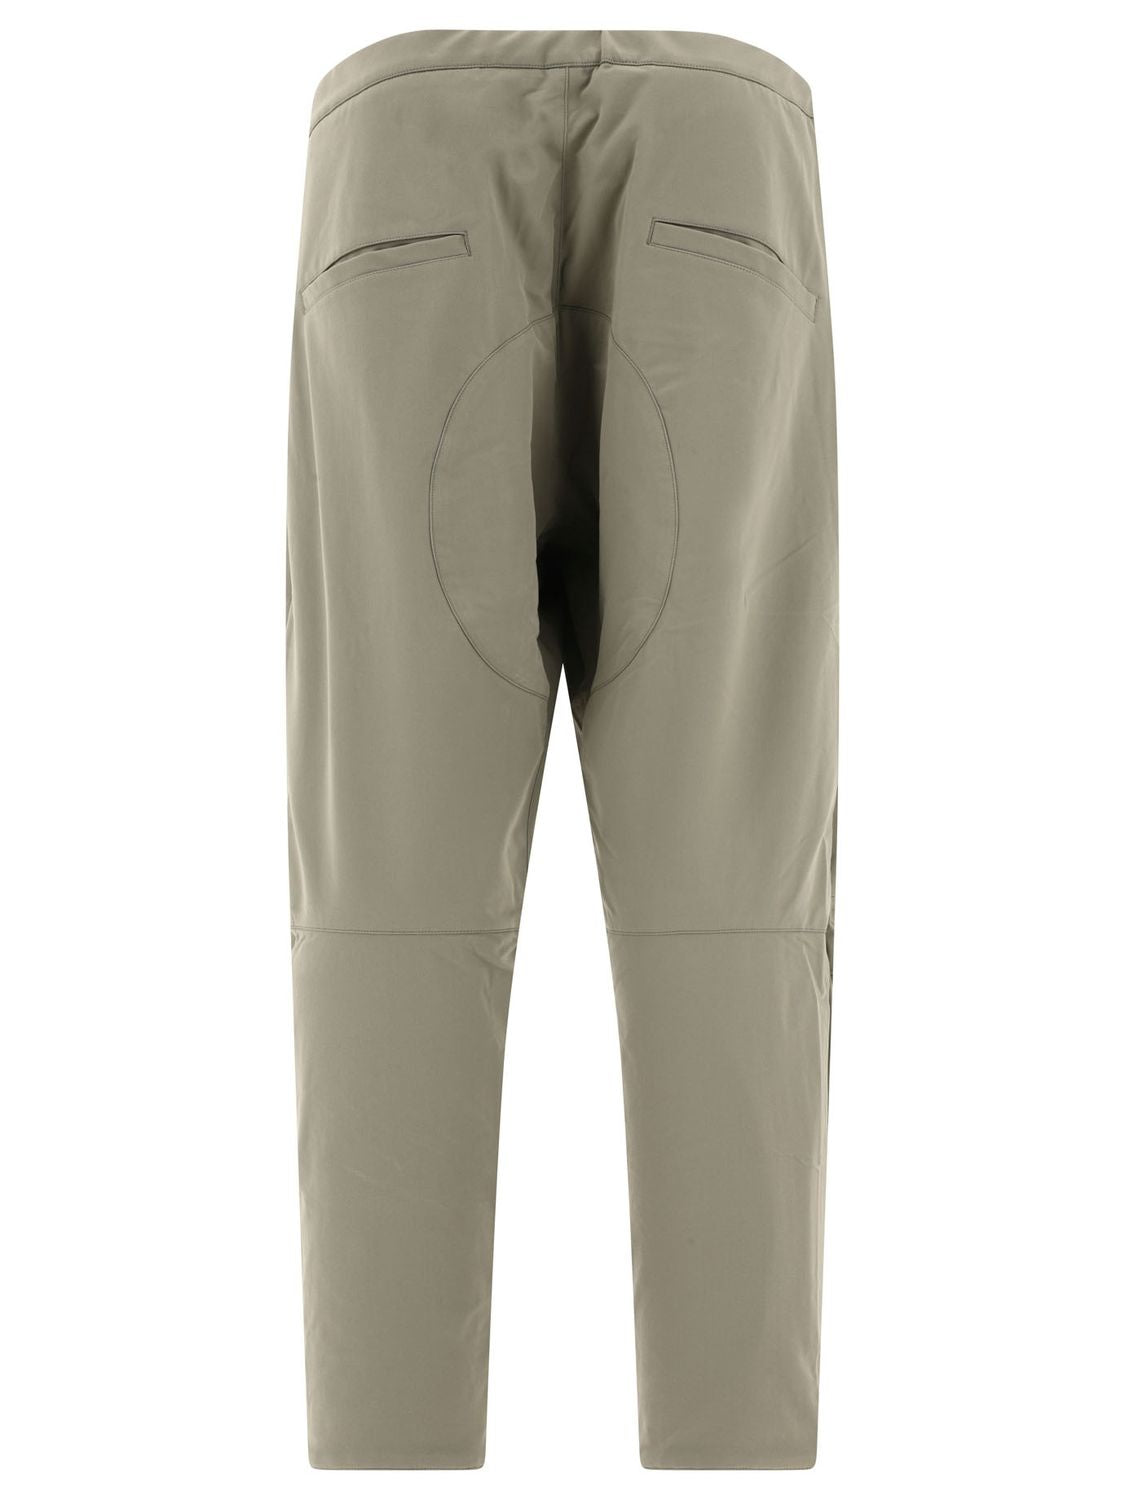 ACRONYM Water-Repellent Men's Trousers for All-Weather Comfort